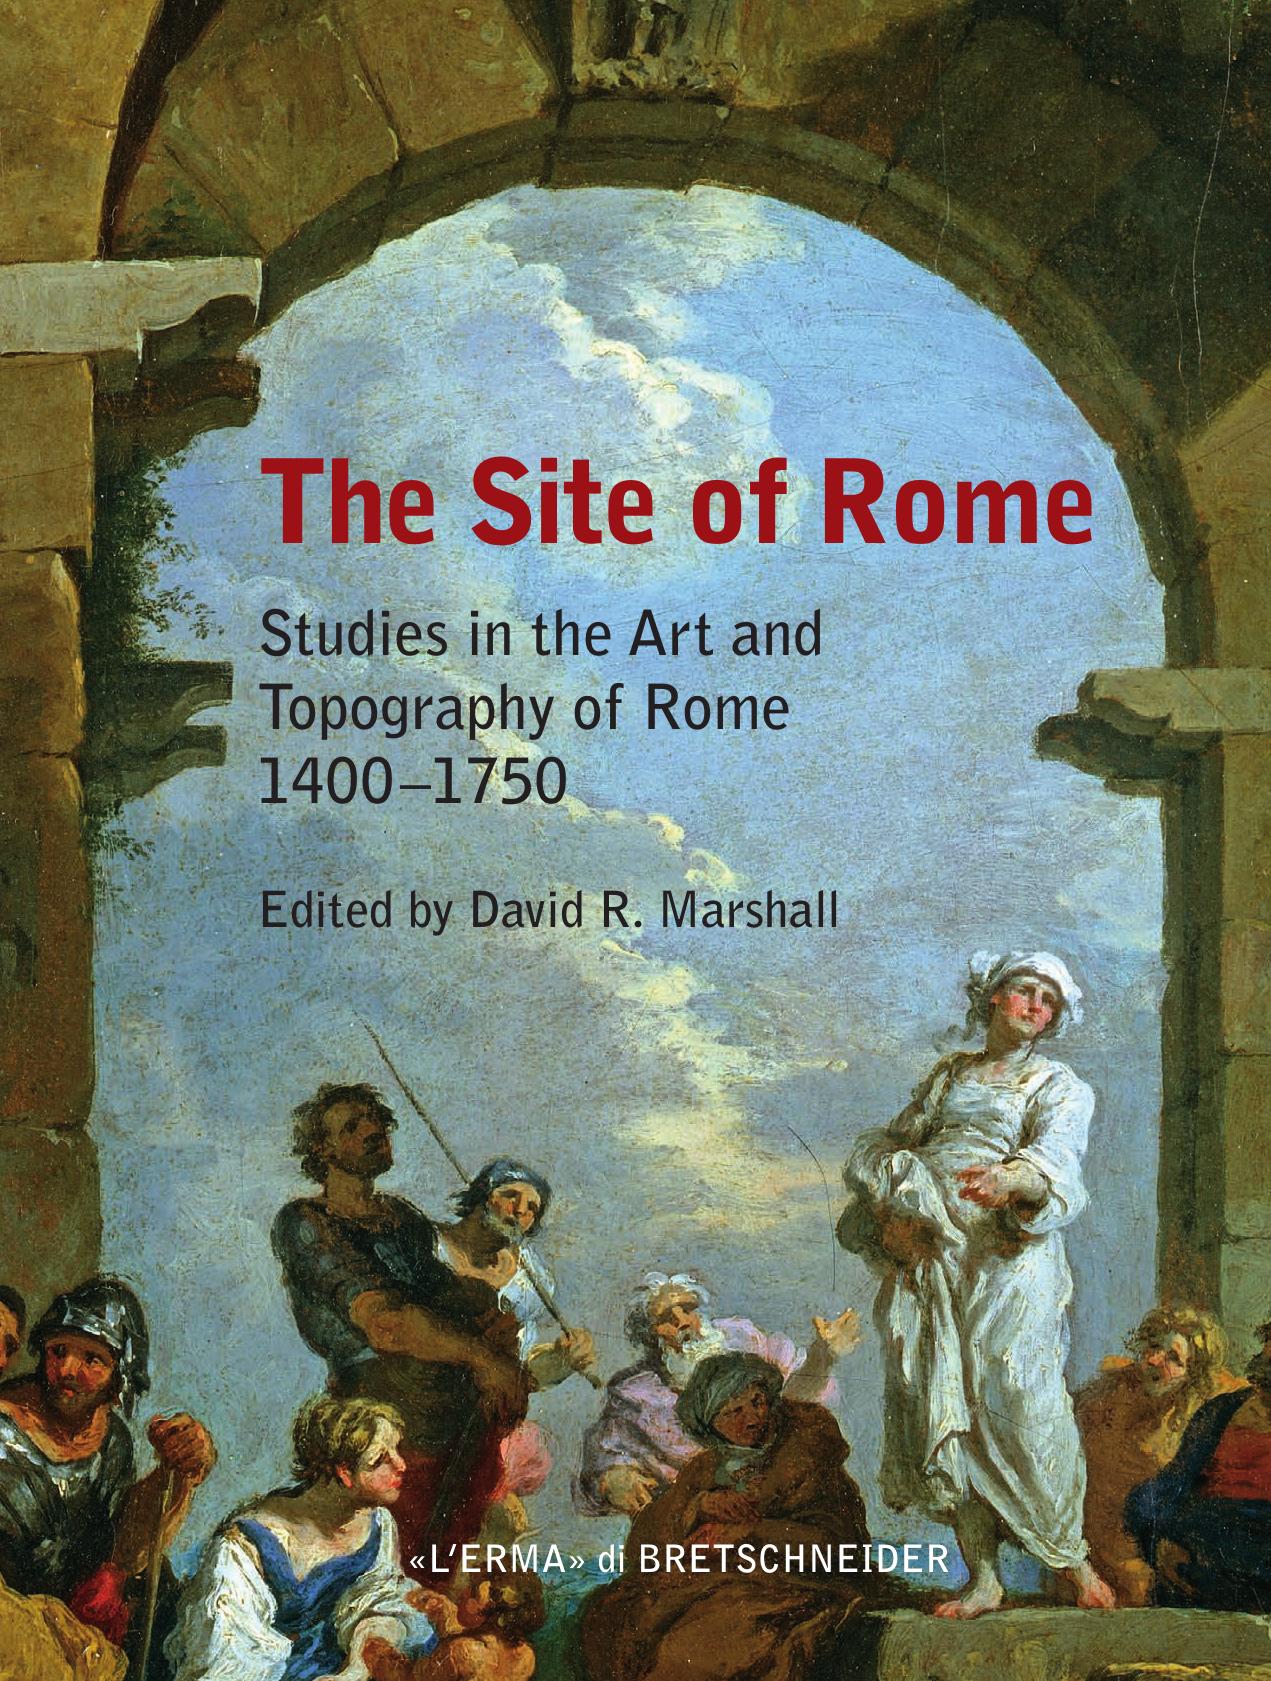 The Site of Rome: Studies in the Art and Topography of Rome 1400-1750 by David R. Marshall